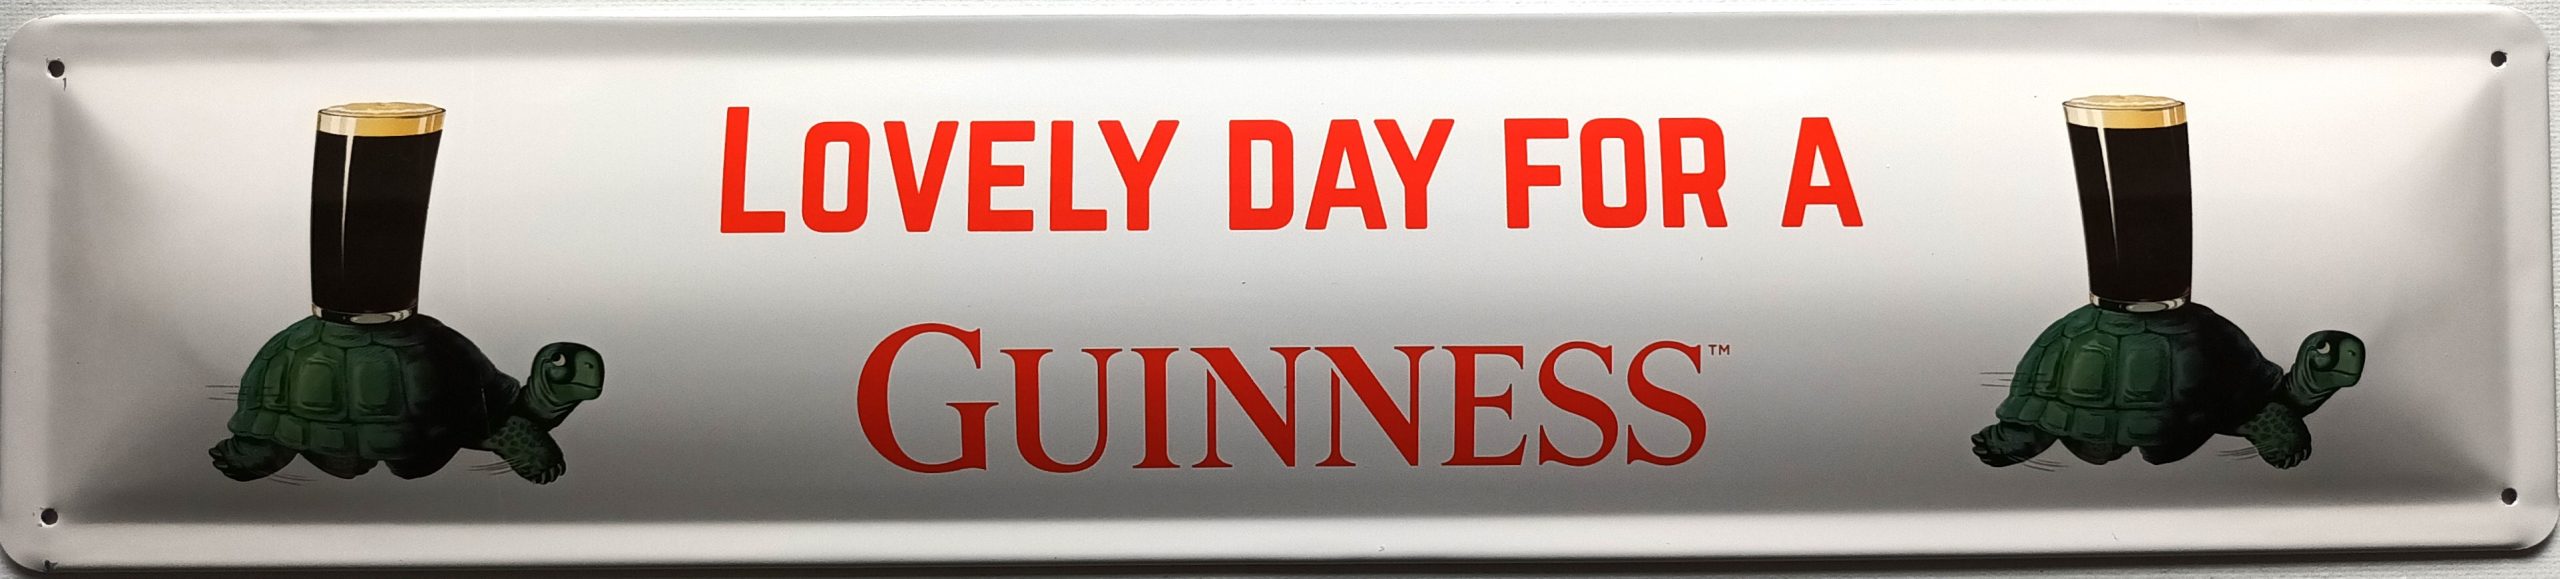 plaque métal vintage LOVELY DAY FOR A GUINNESS